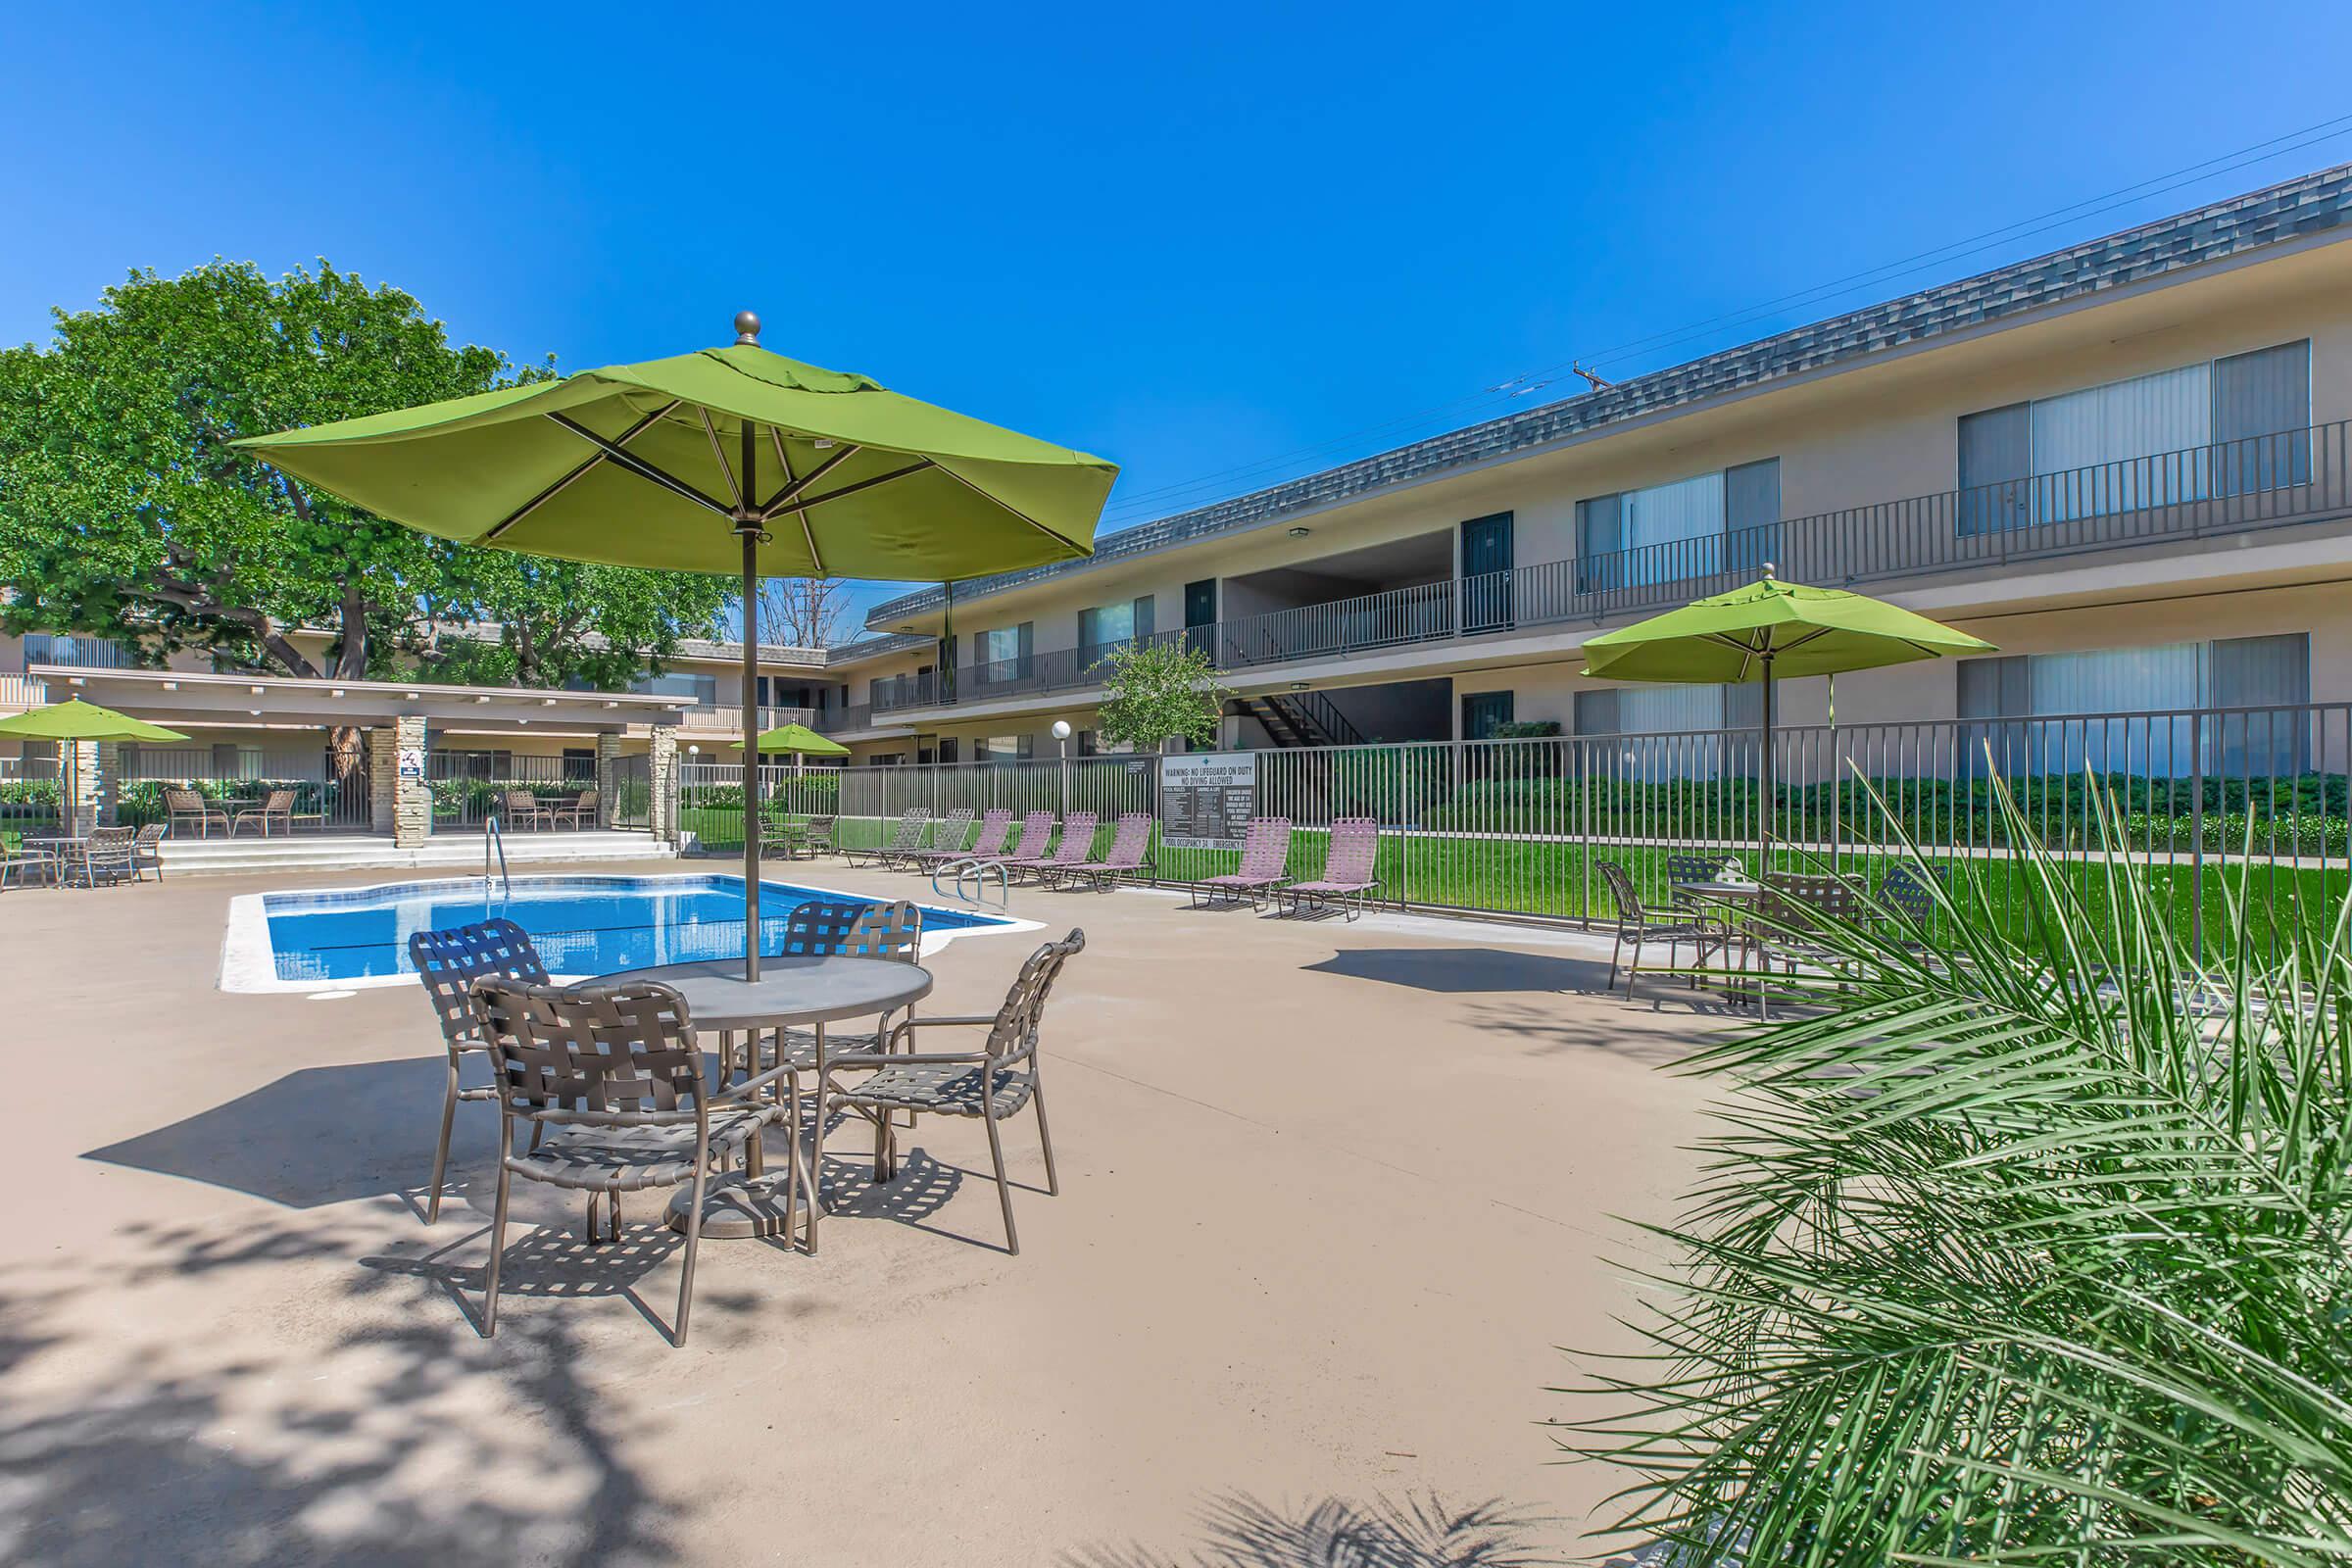 Kimberly Arms Apartment Homes community pool with tables and green umbrellas